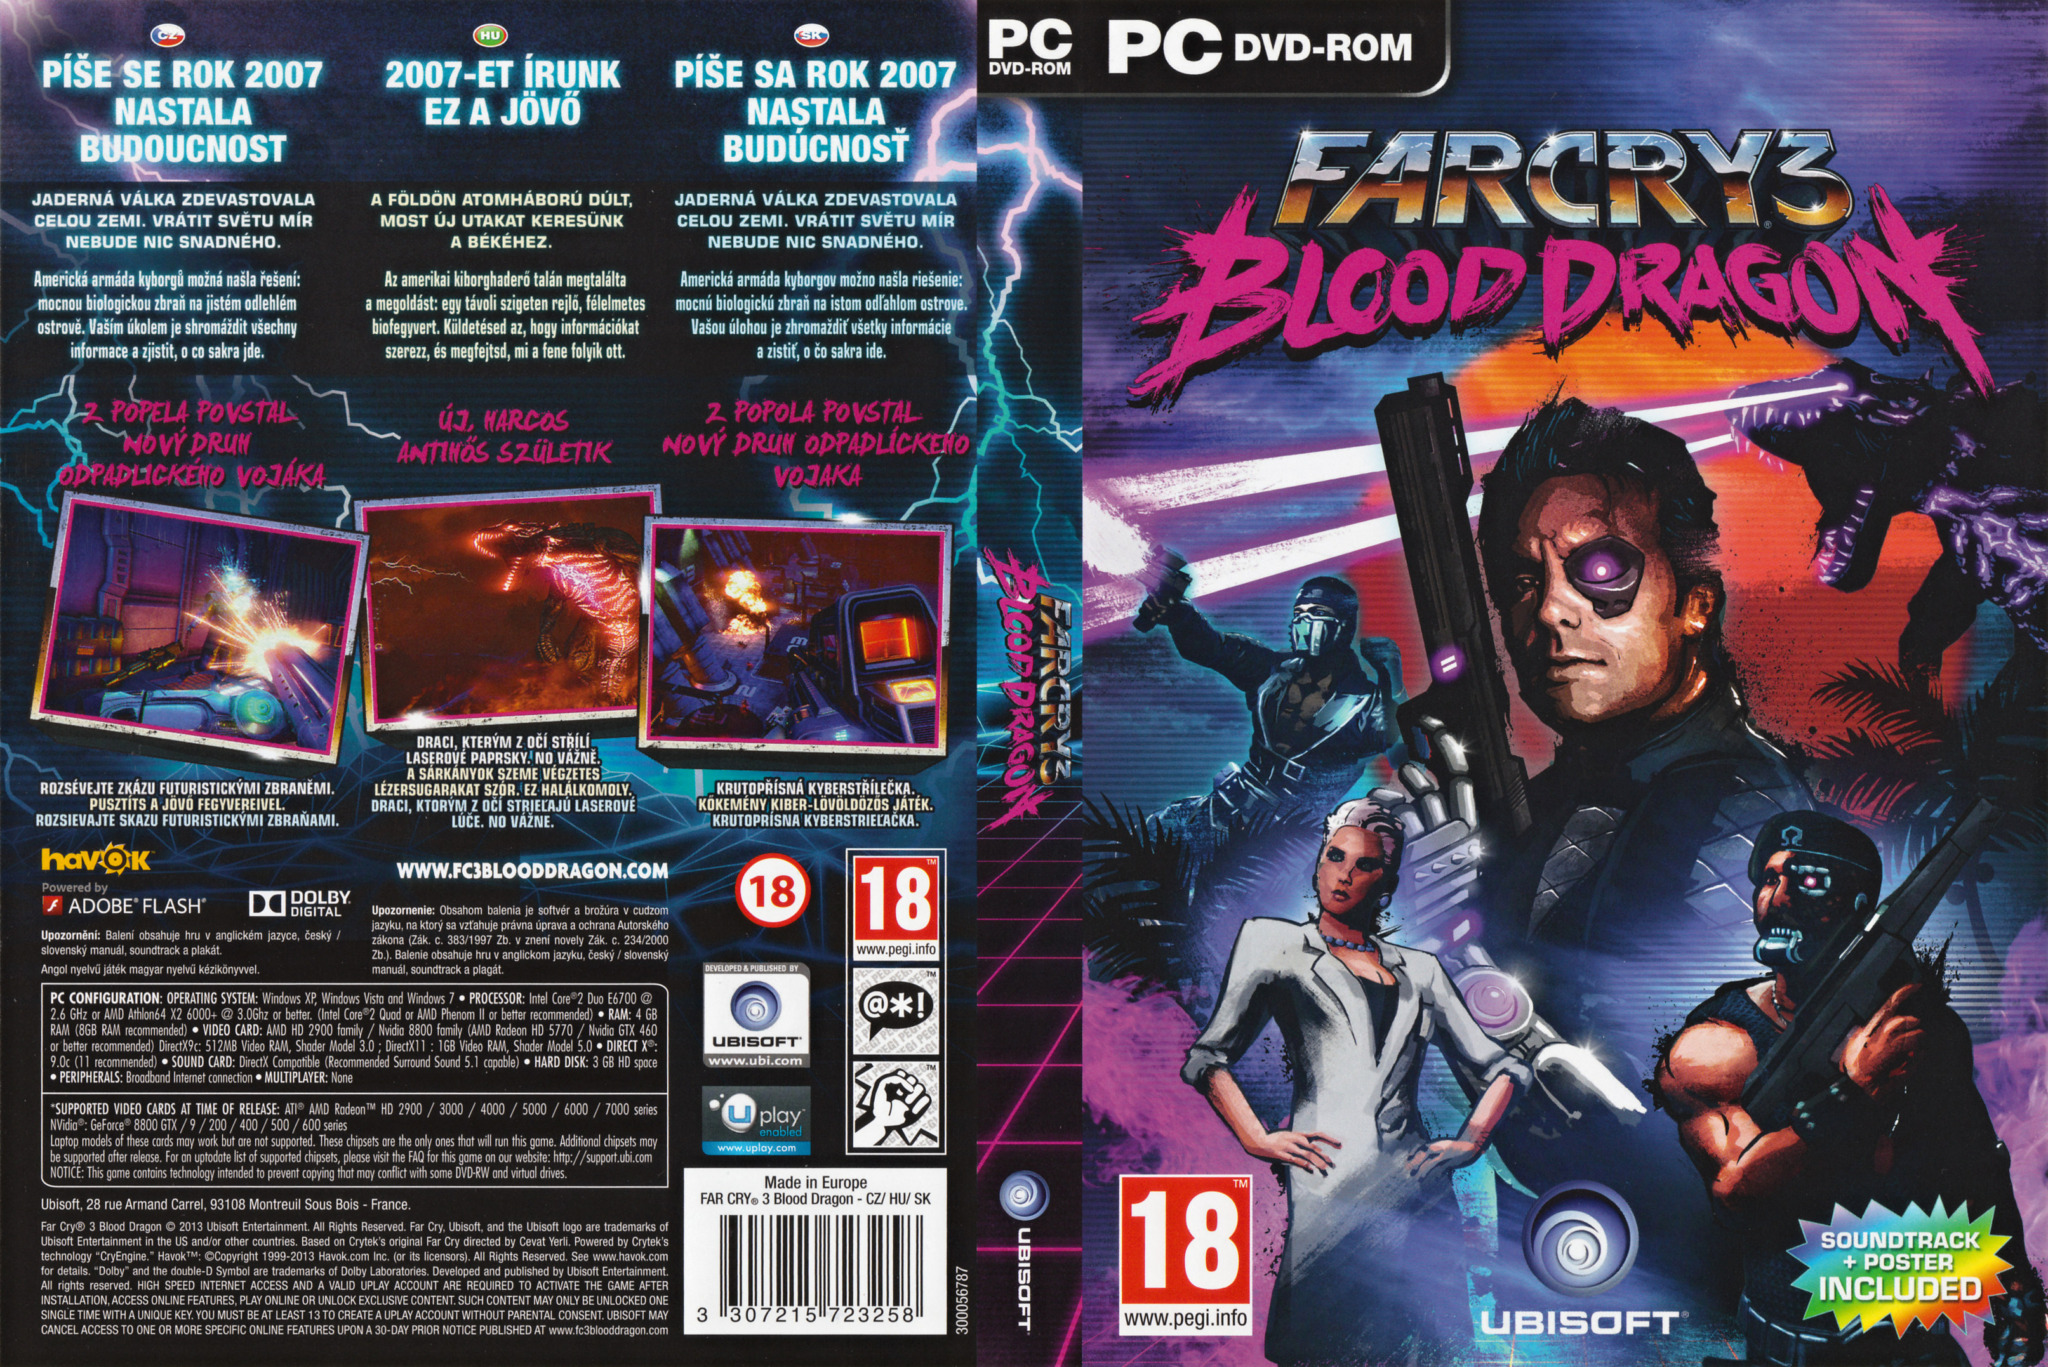 download far cry blood dragon classic edition for free